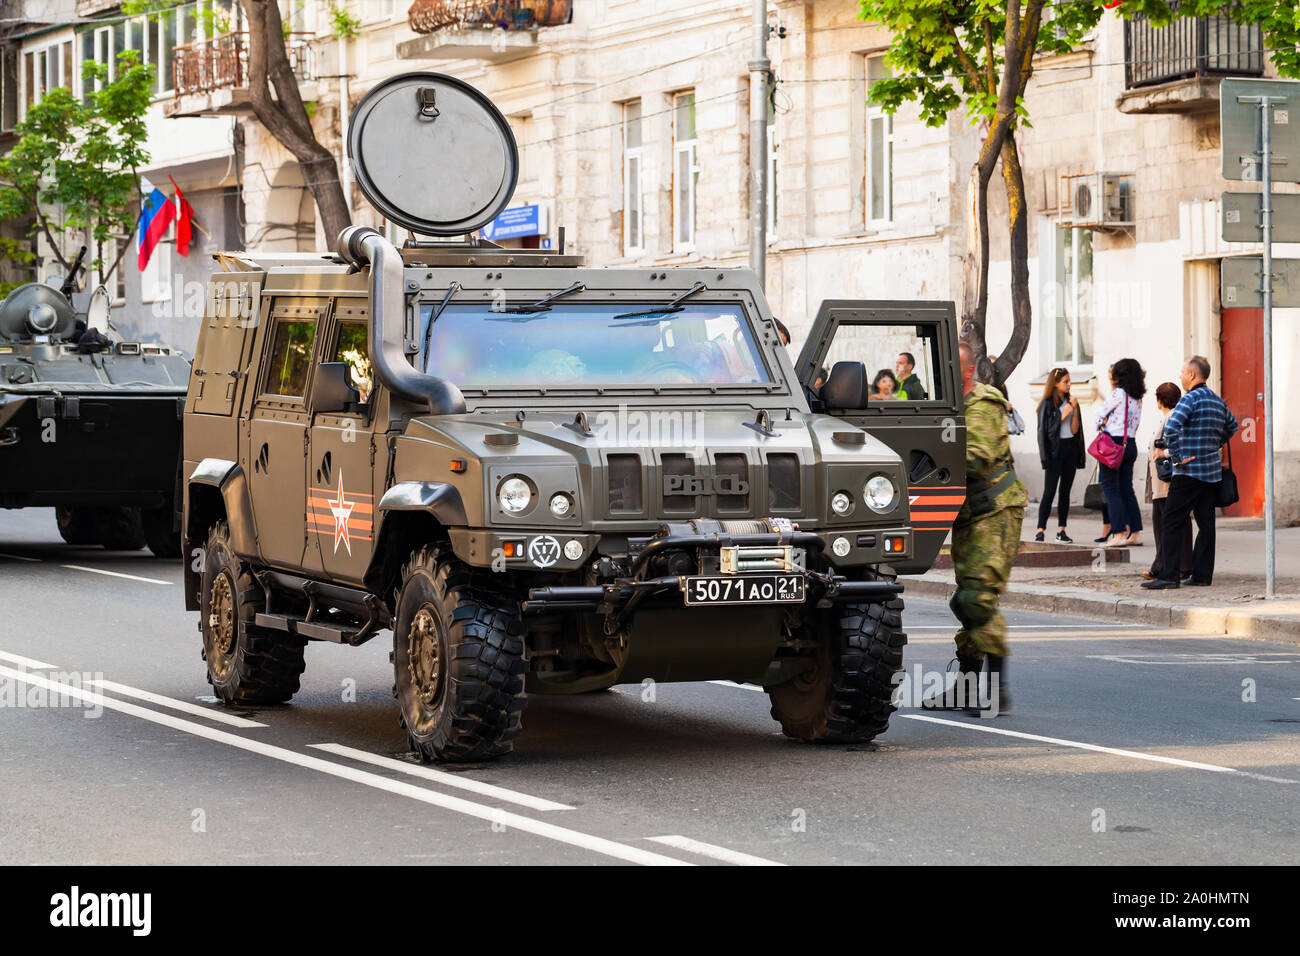 Sevastopol, Crimea - May 5, 2018: Military Iveco LMV car stands on a street. This Light Multirole Vehicle is a 4WD tactical vehicle developed by Iveco Stock Photo